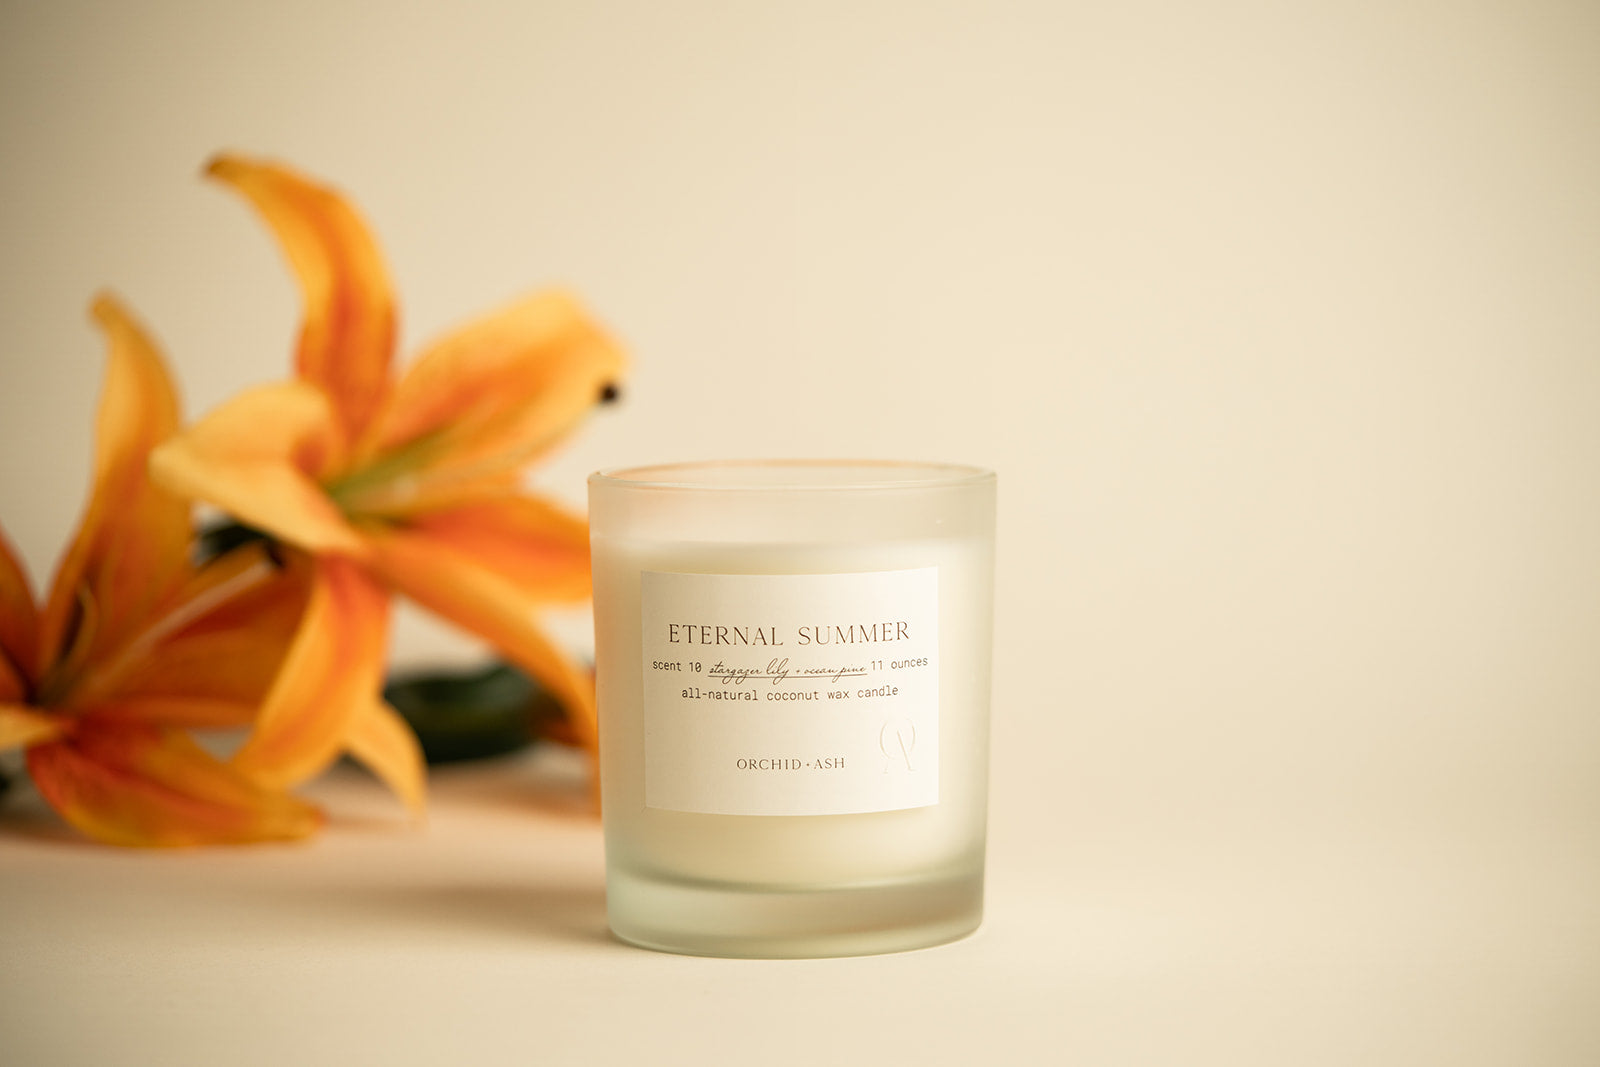 ETERNAL SUMMER Natural Candle by Orchid + Ash